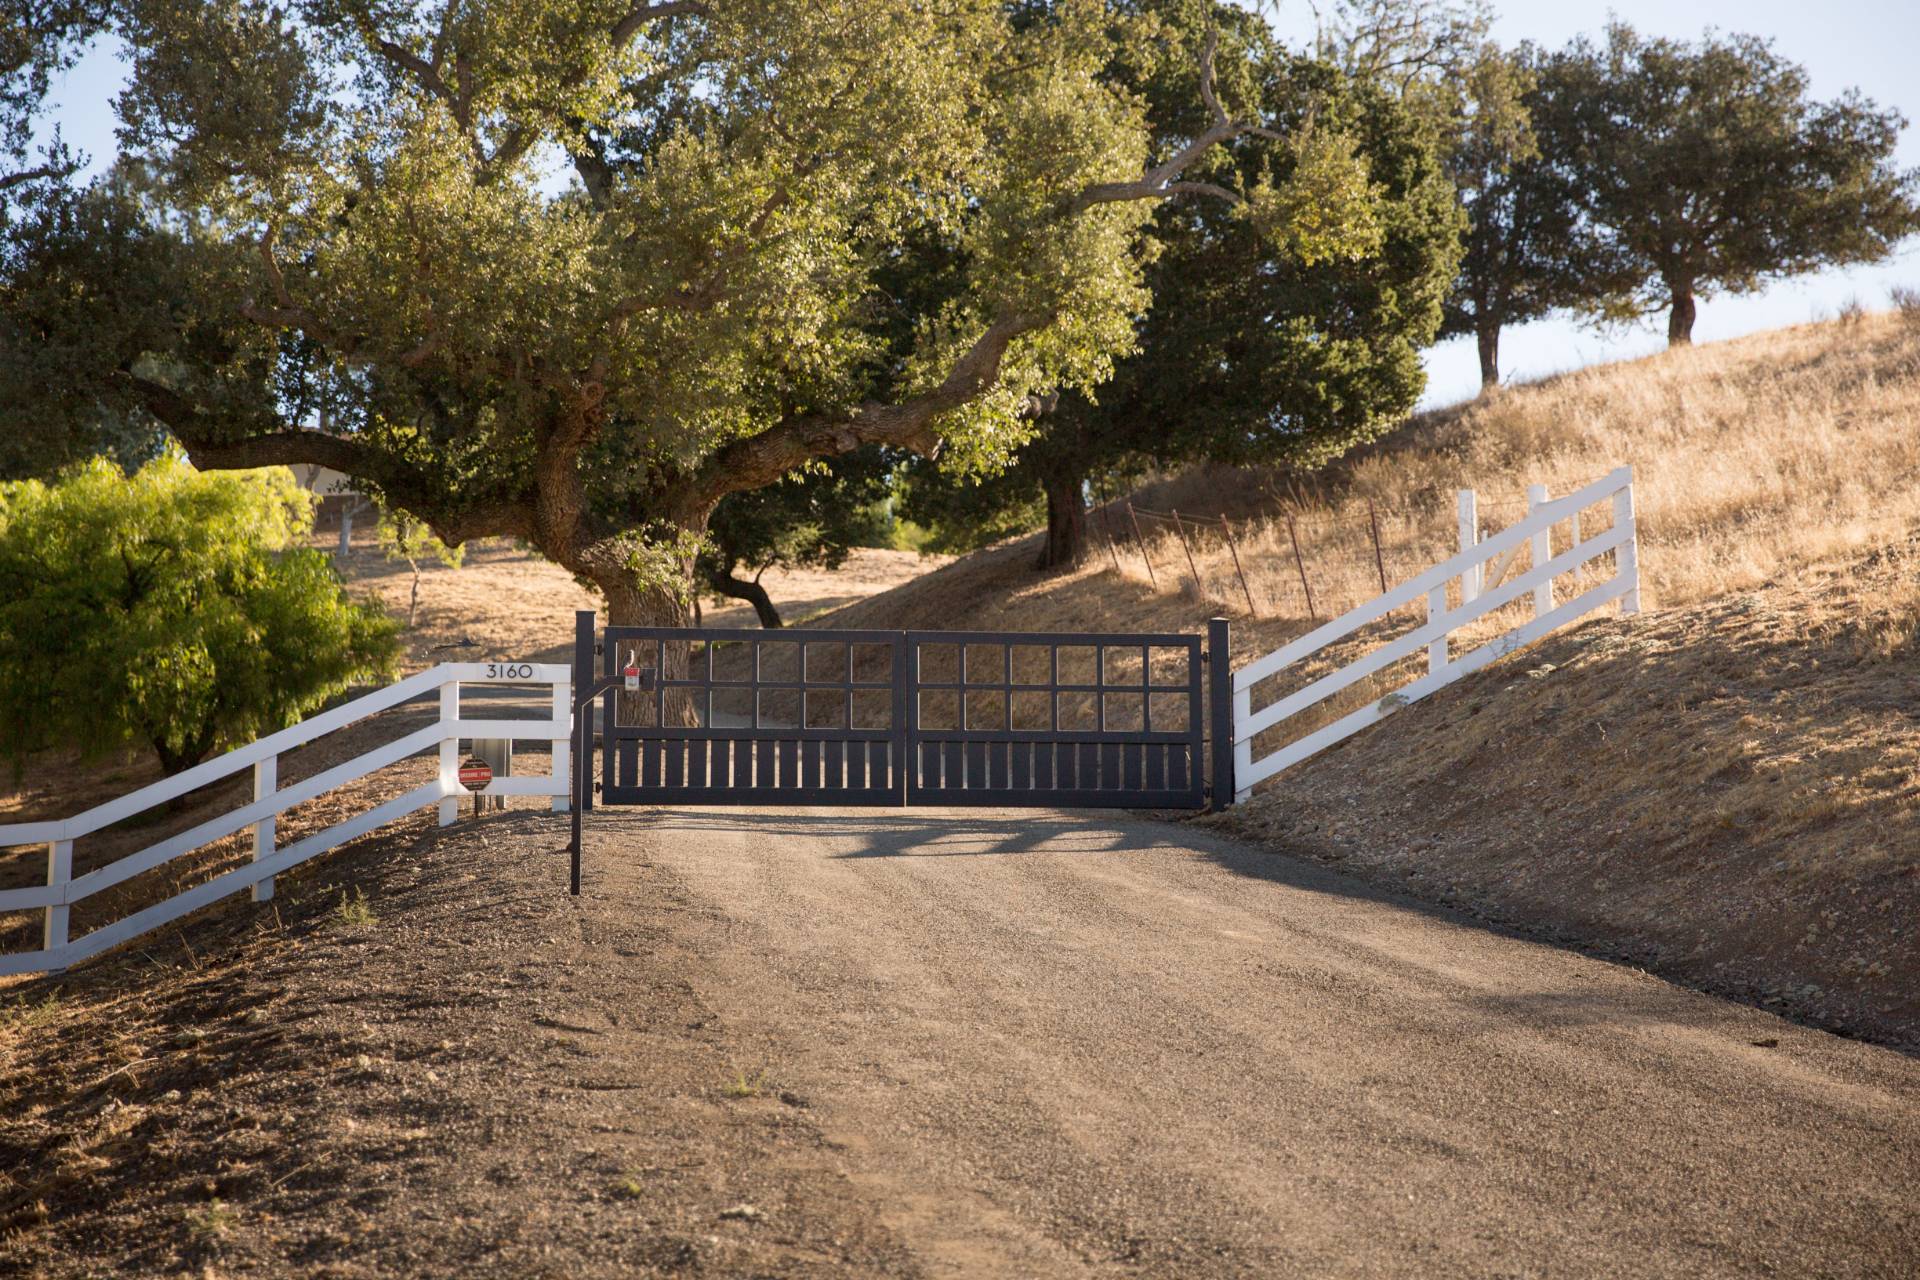 The gate and road GPM completed a chip seal project on in Santa Ynez.